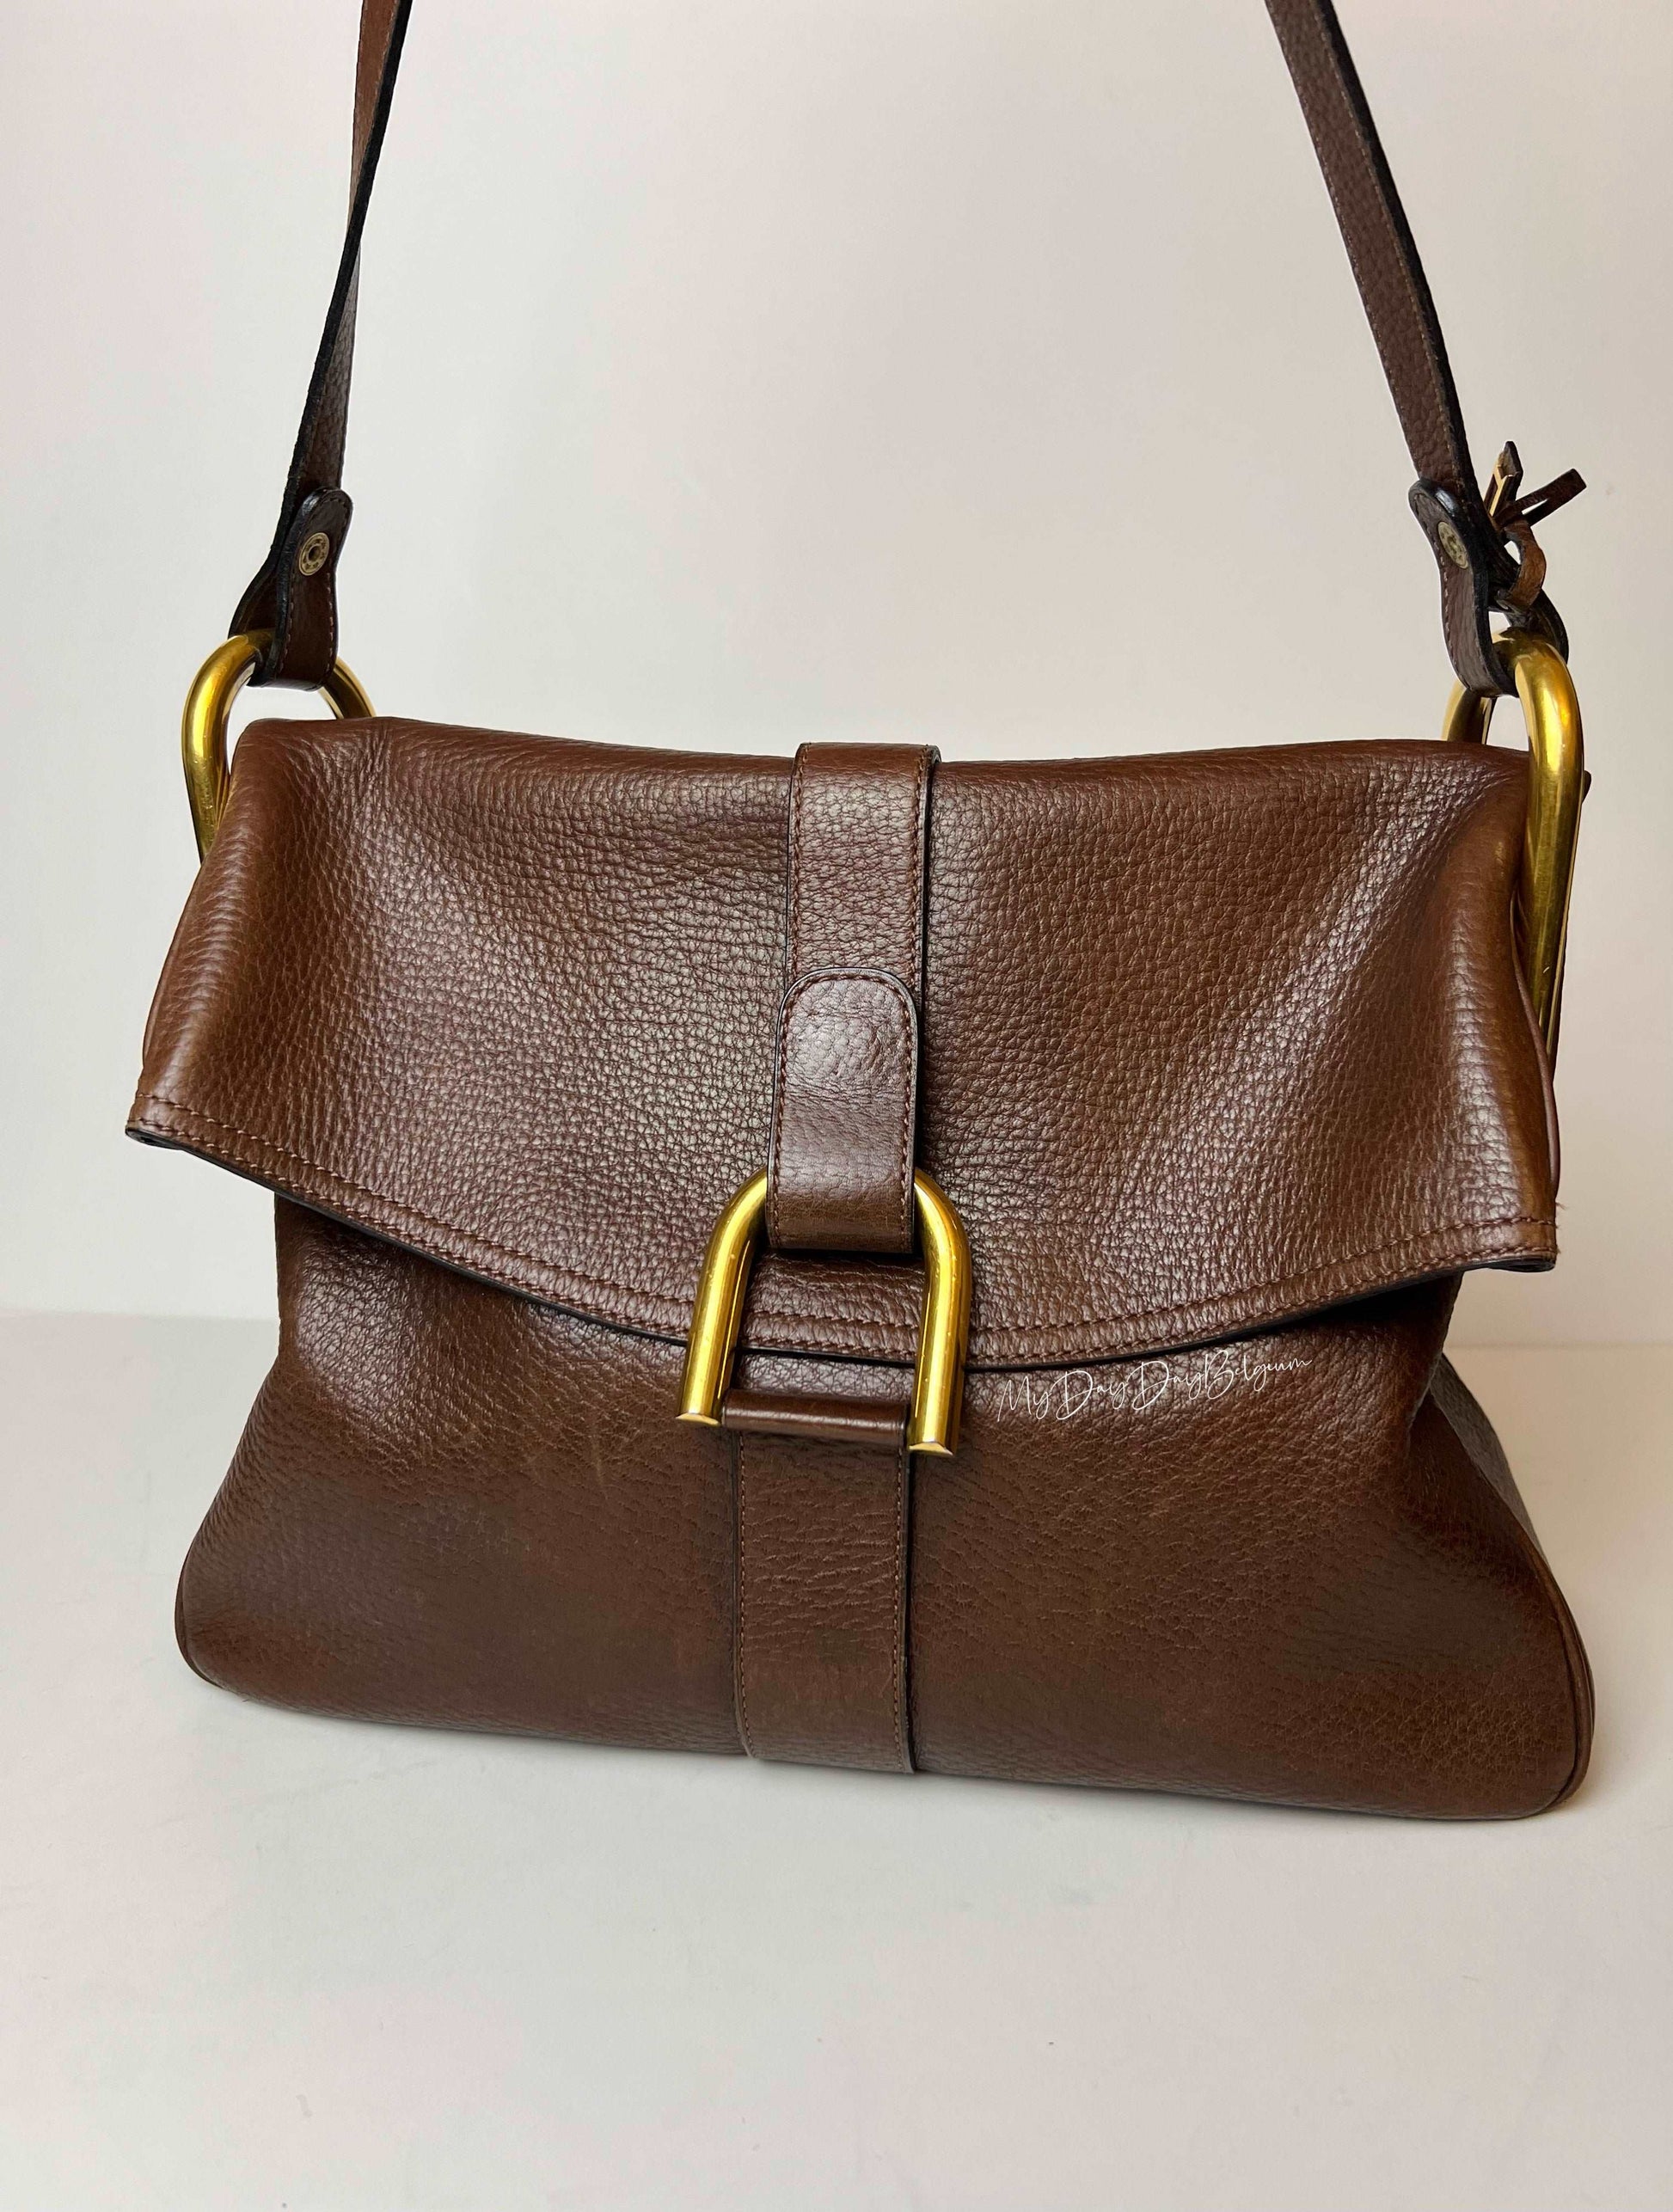 Delvaux bag Givry